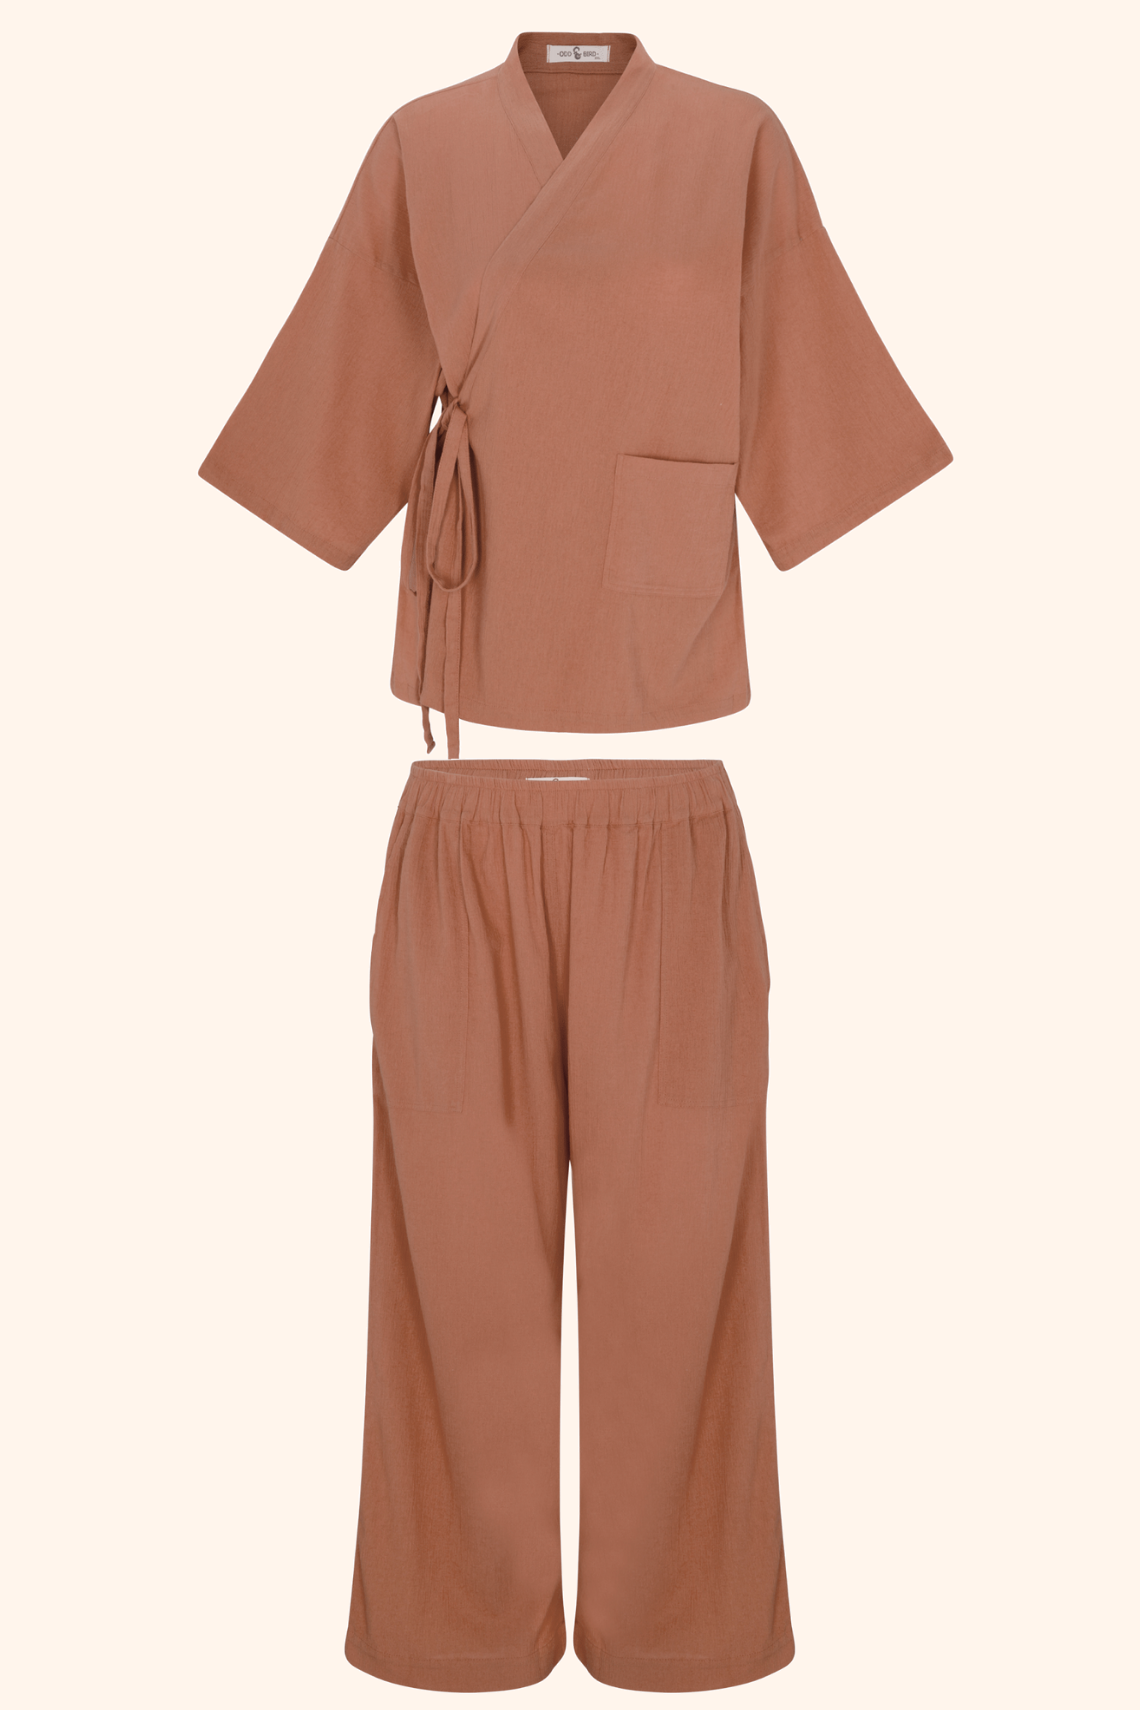 Kardeş Sile Loungewear Top and Pants in Canyon Rose | Plus Size | Luxury  100% Soft Turkish Sile Cotton | Indoor and Outdoor Wear – OddBird